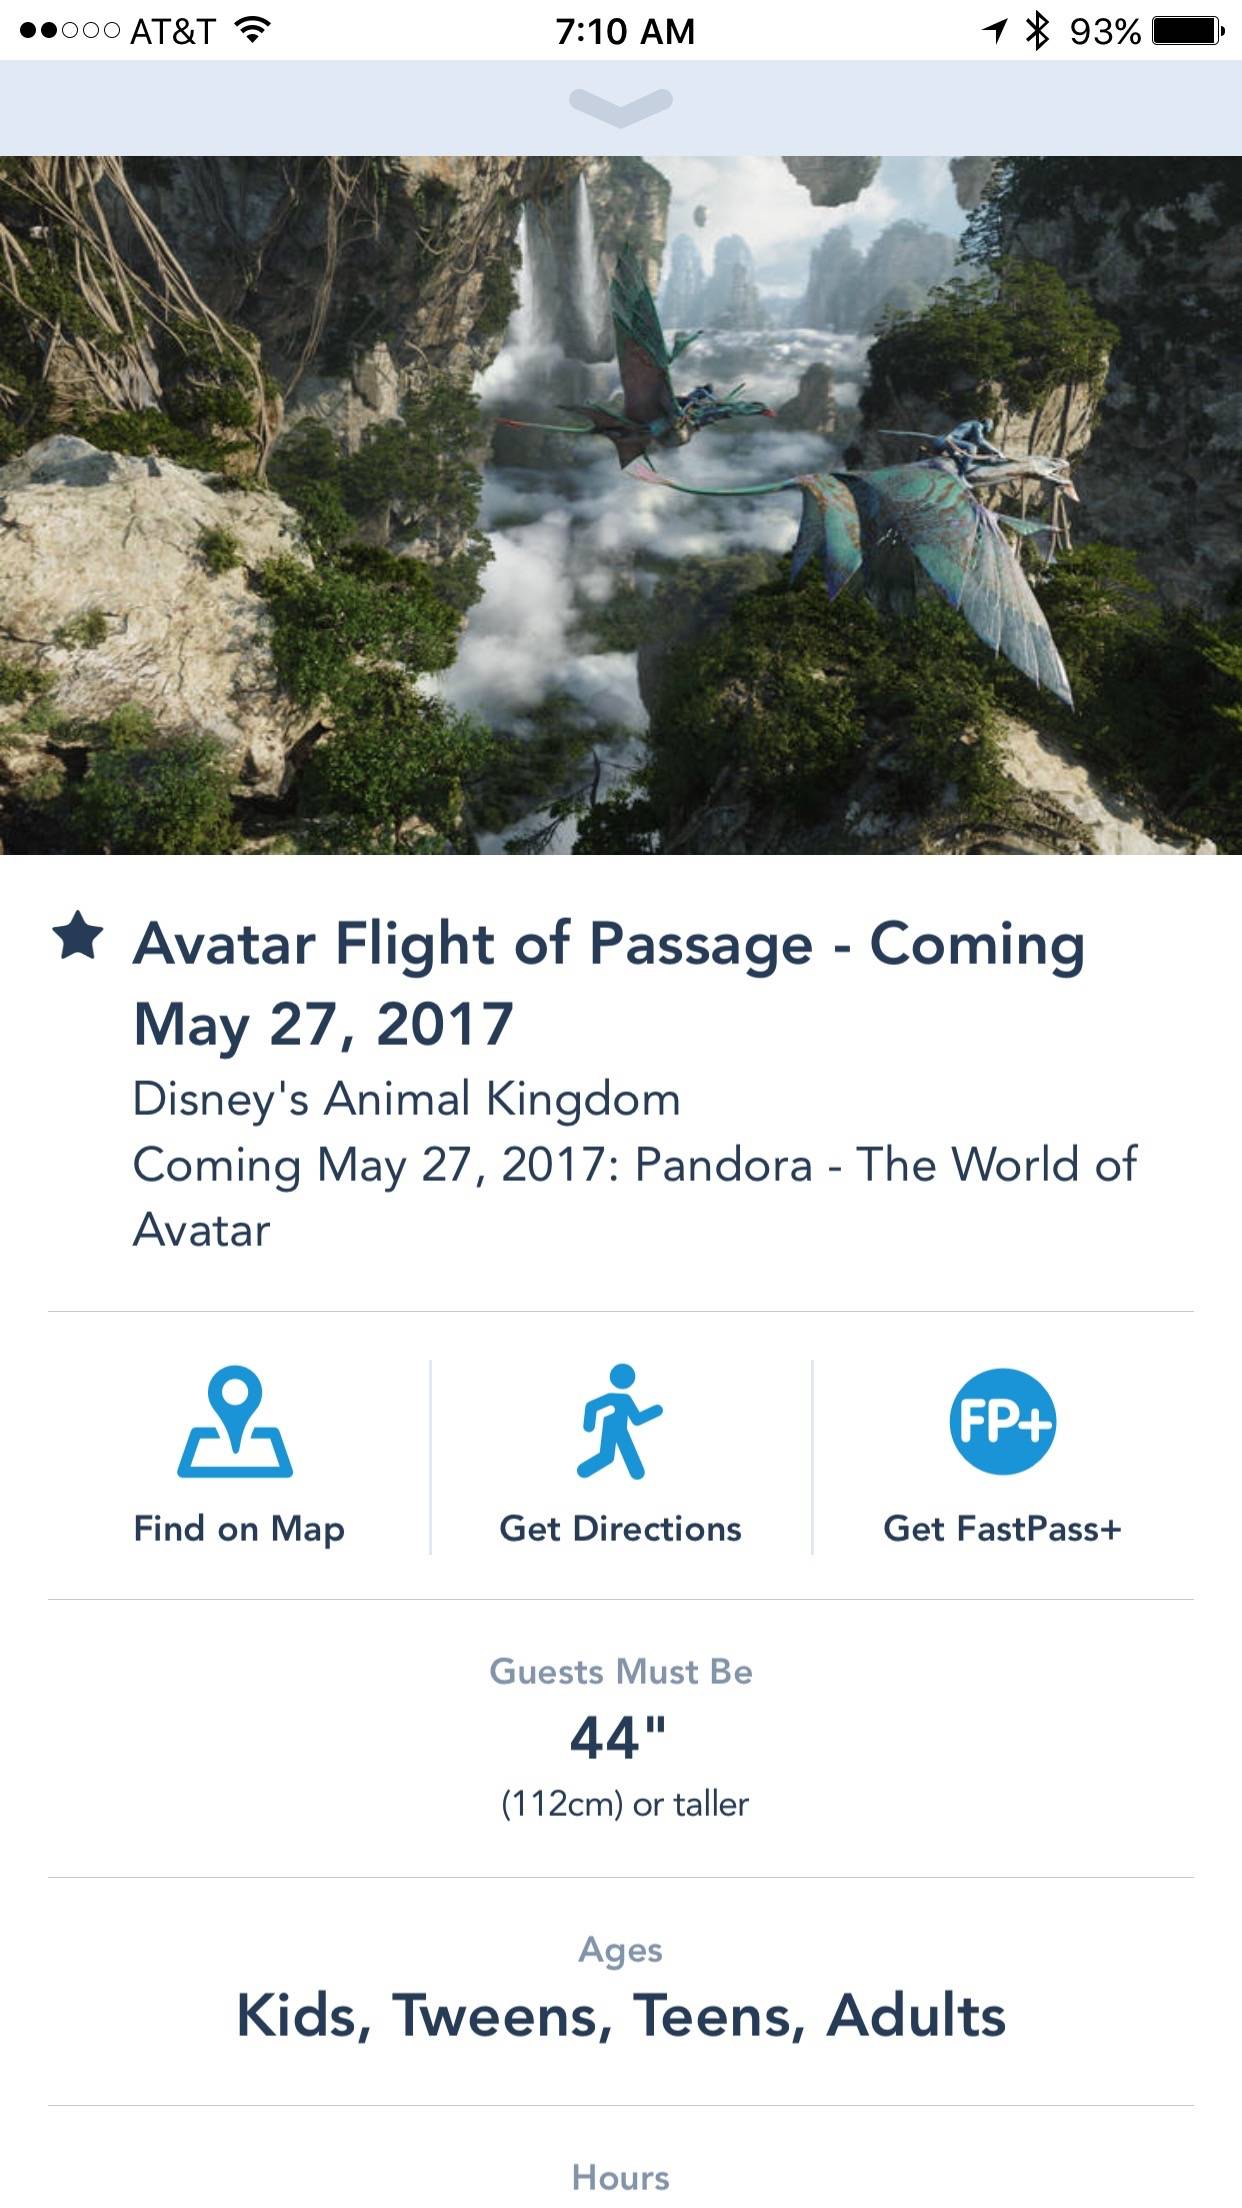 FastPass+ reservations now available for Pandora - The World of Avatar